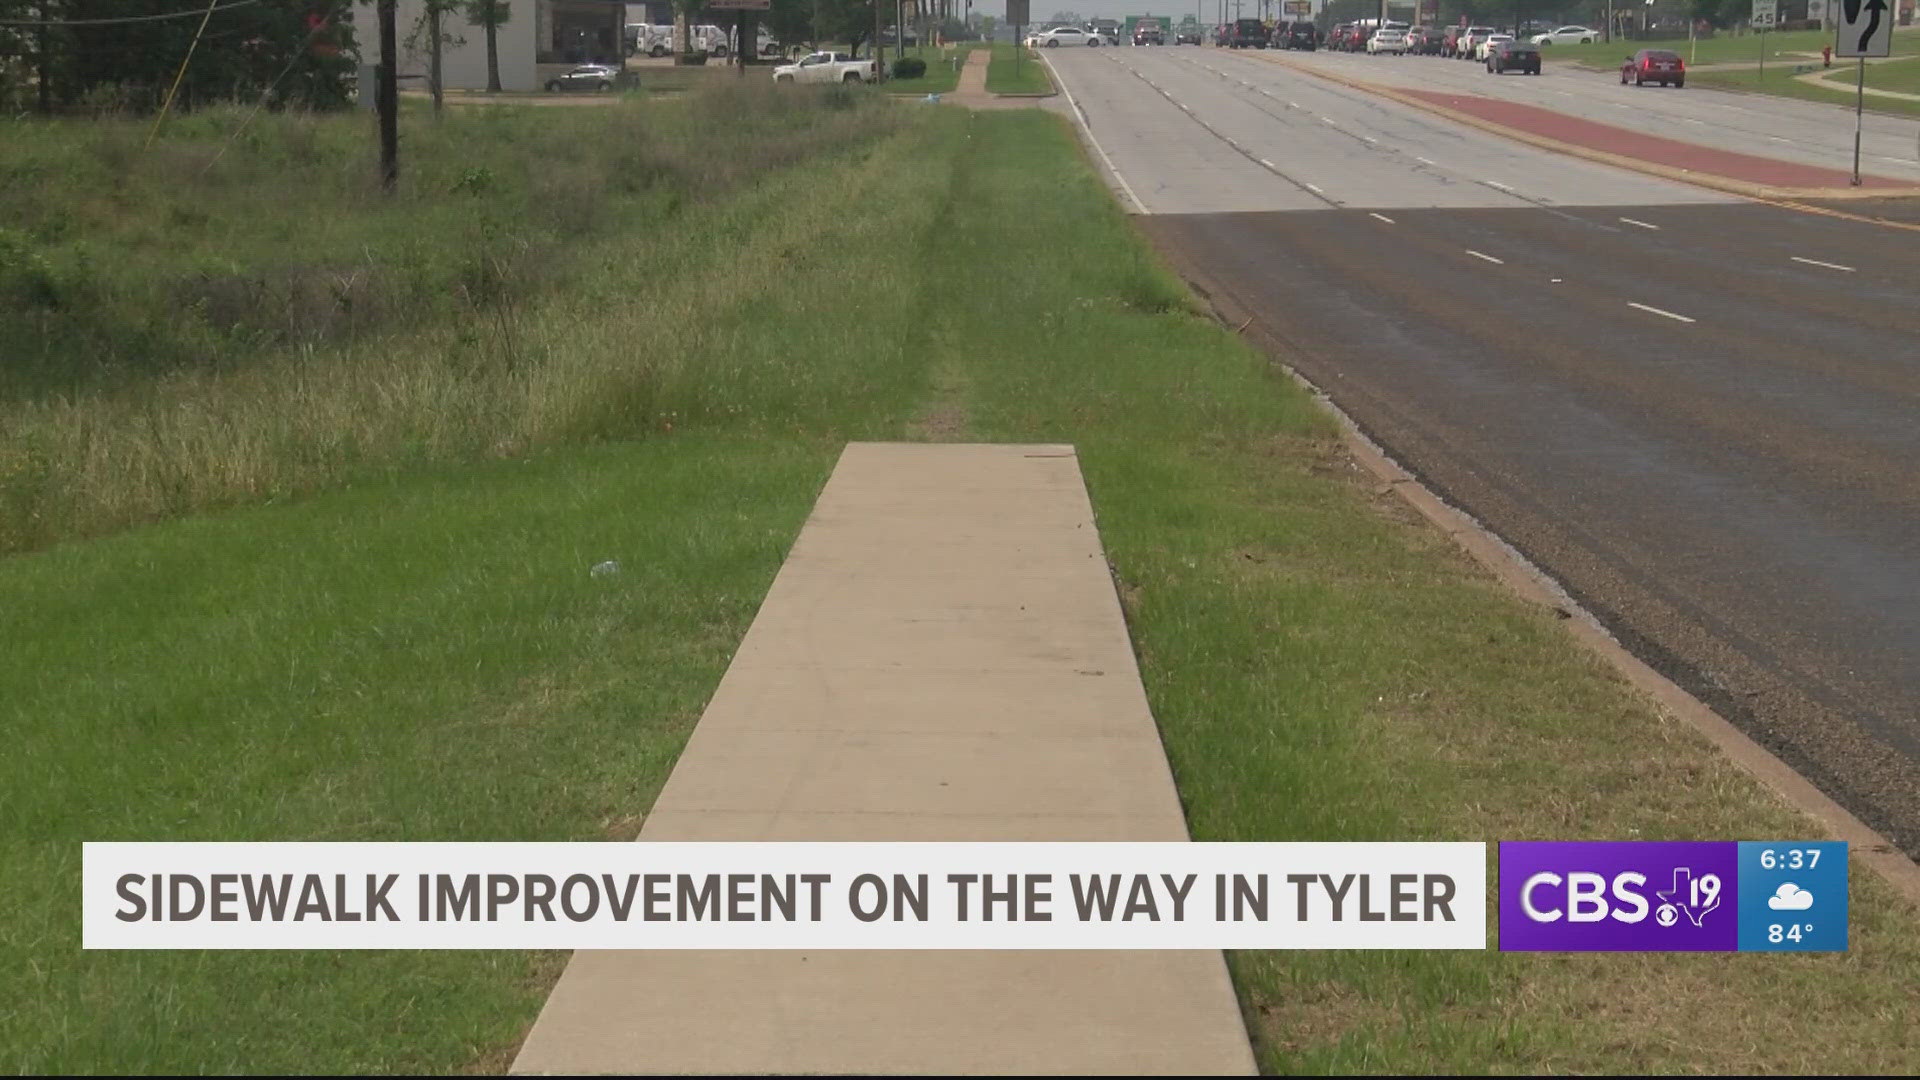 City of Tyler adds sidewalks, makes connections to improve pedestrian safety